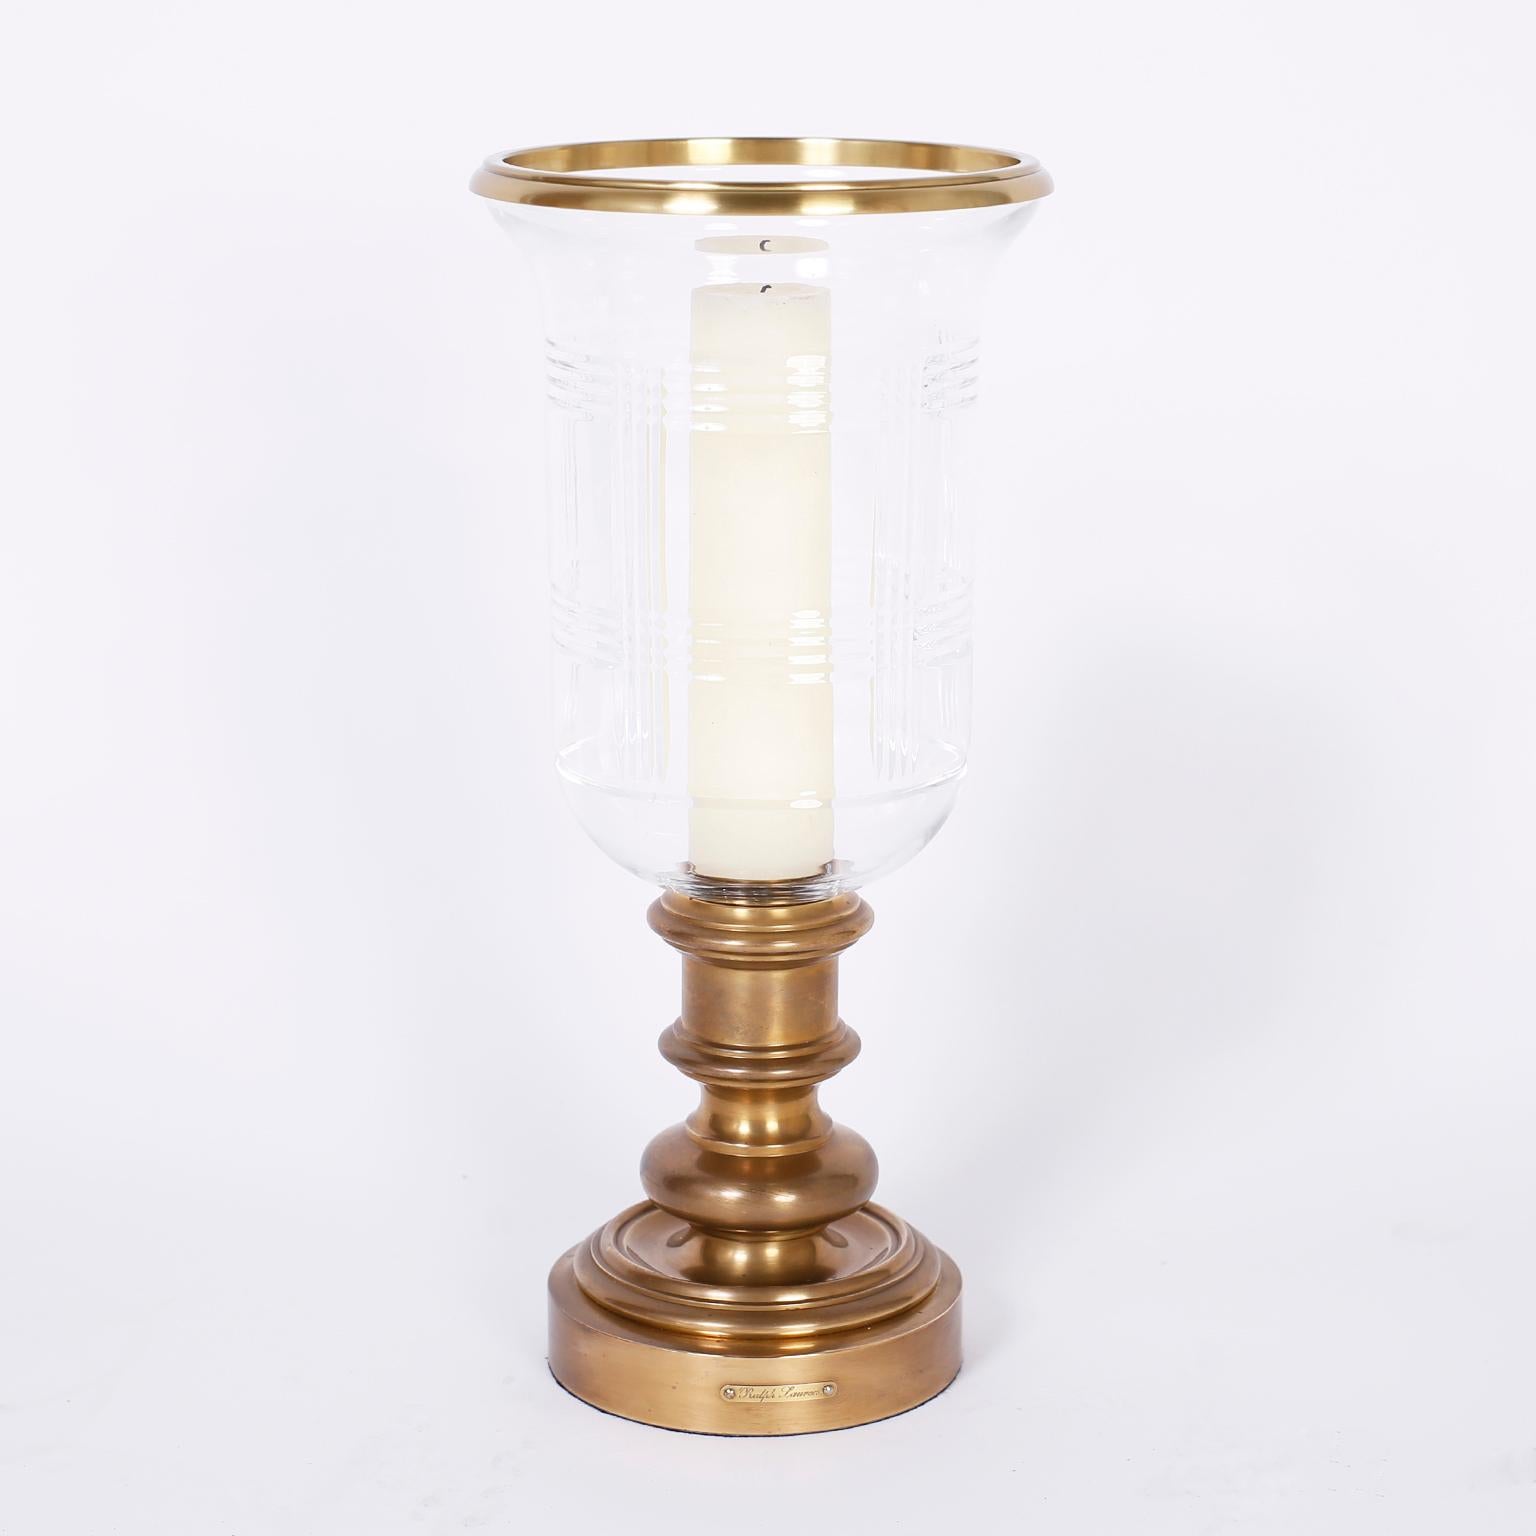 Pair of British Colonial hurricane candlesticks or holders with a brass ring circling the tops, glass shades with pressed geometric designs and burnished brass bases with Classic form. Signed Ralph Lauren on a plaque.